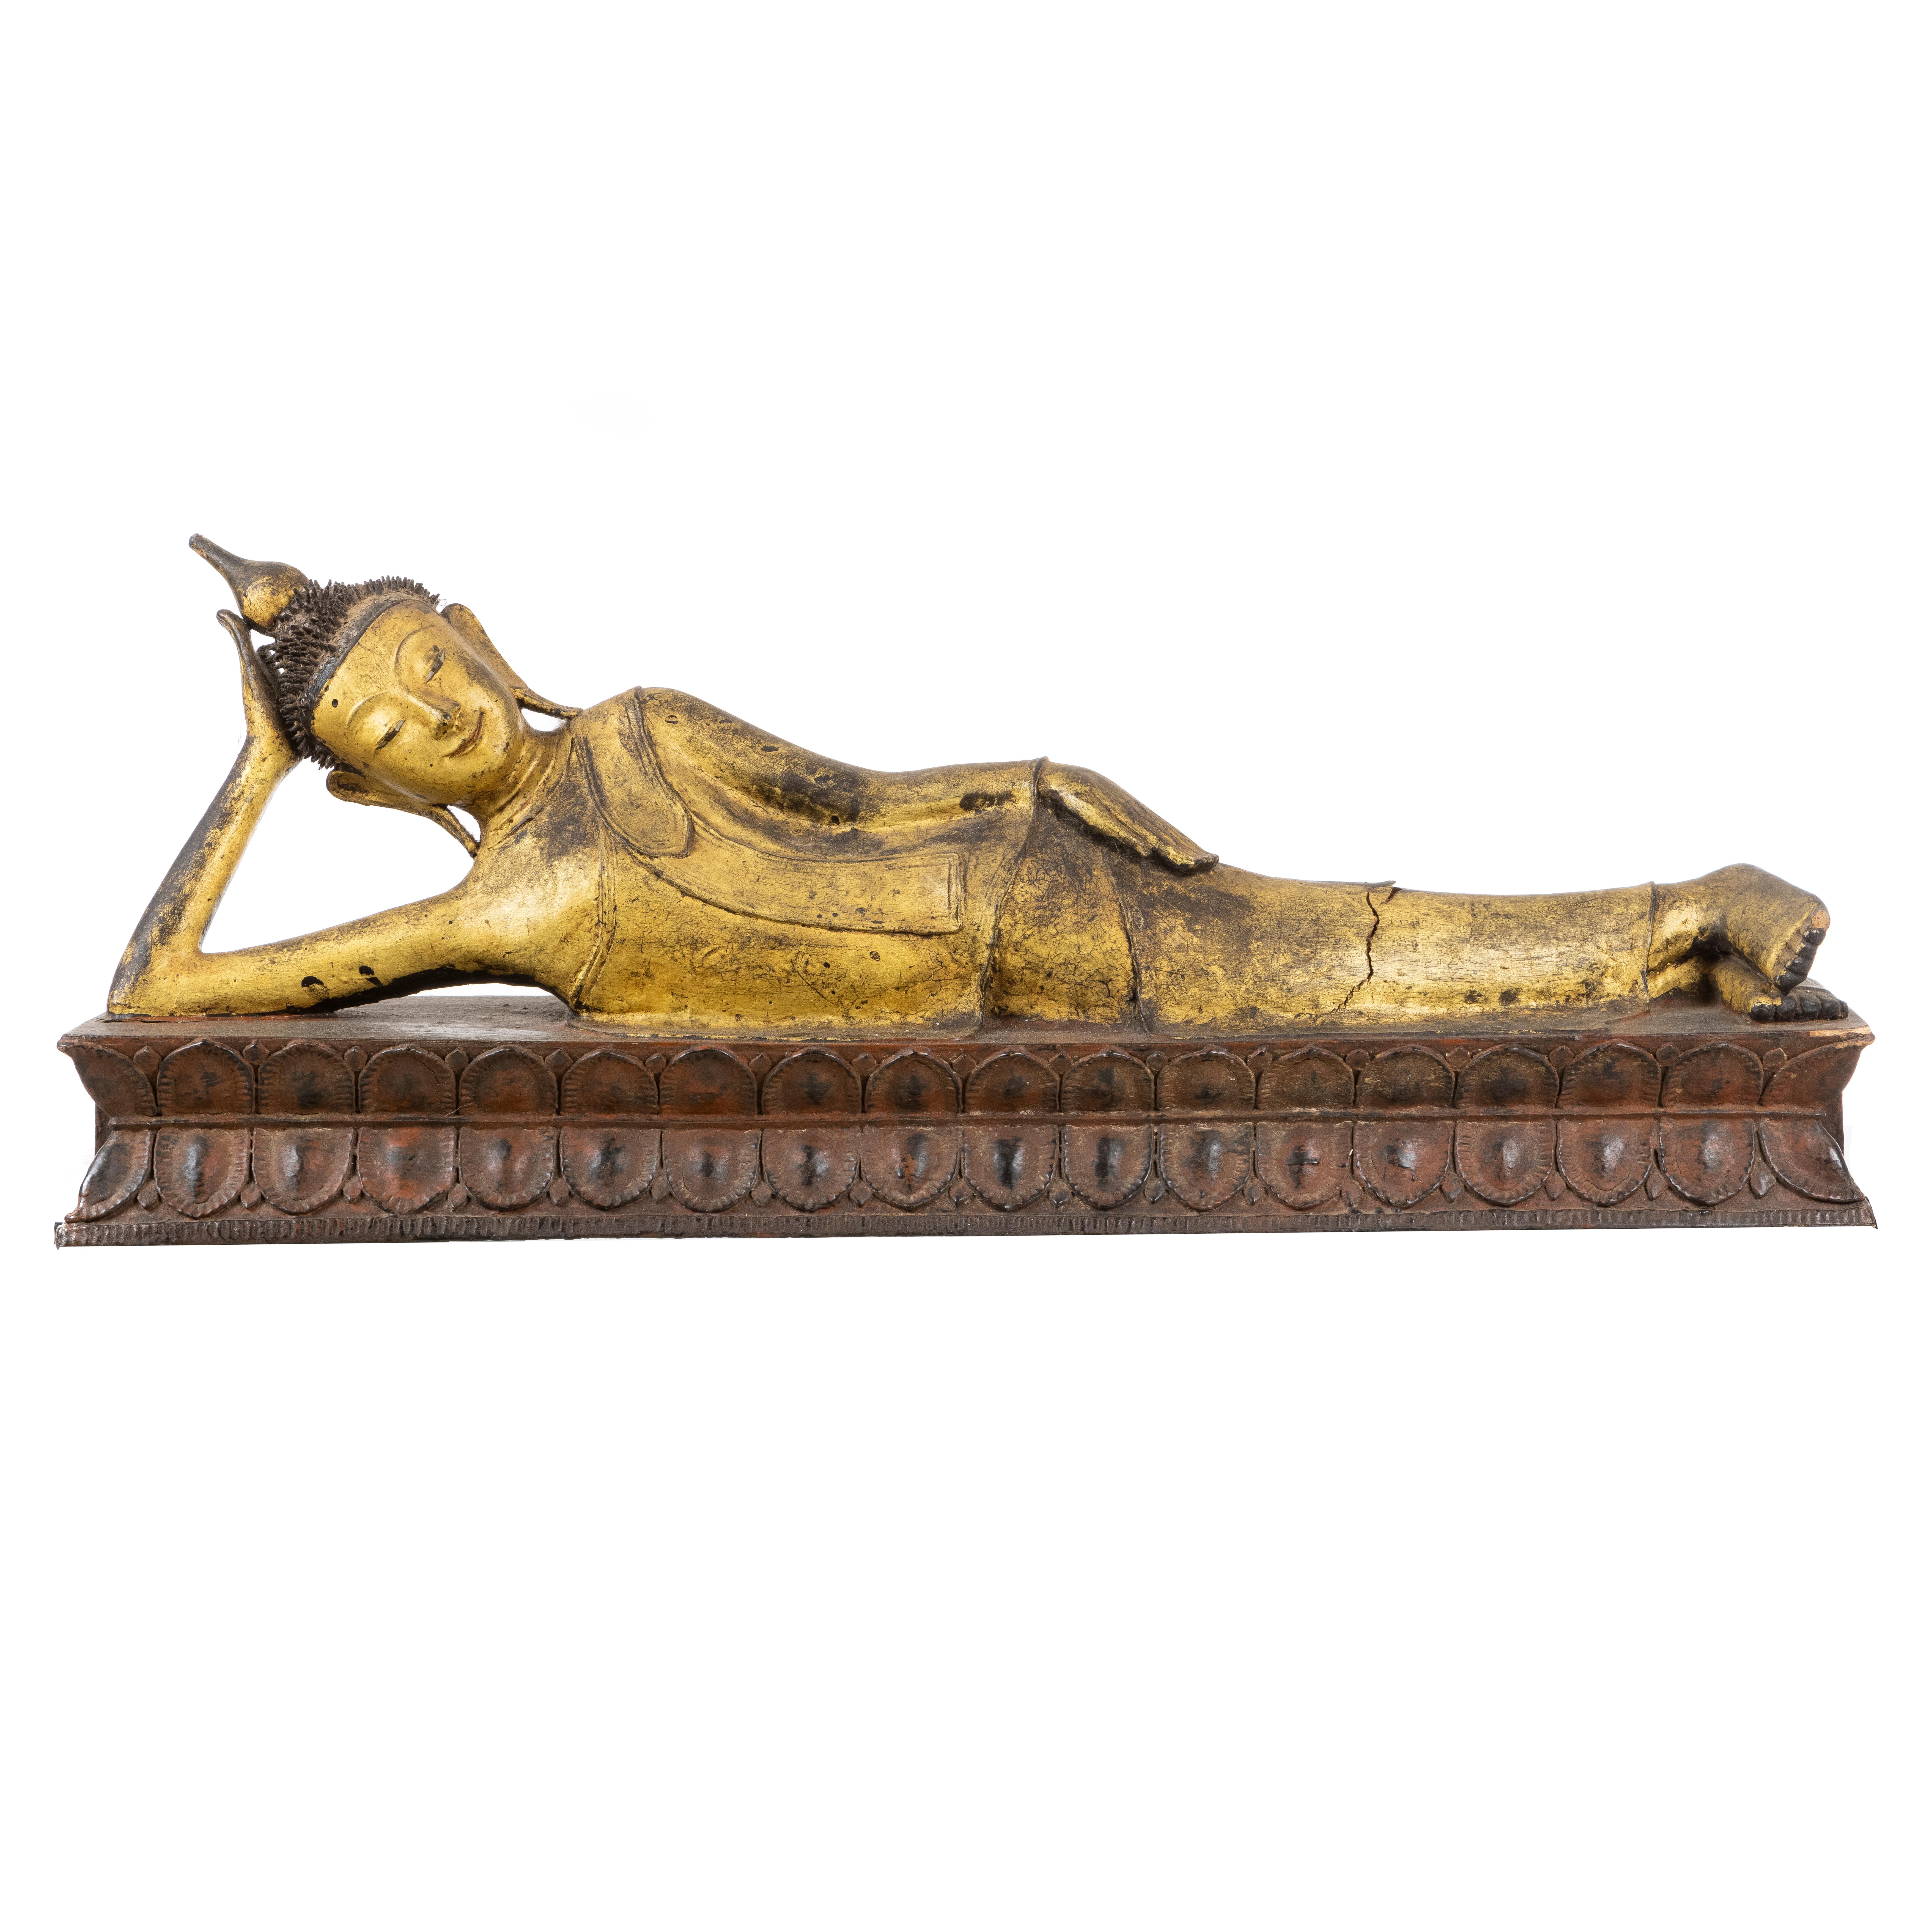 A fine Burmese, Shan, 19thC Parinirvâna gilt lacquered Buddha very well carved in reclining position.